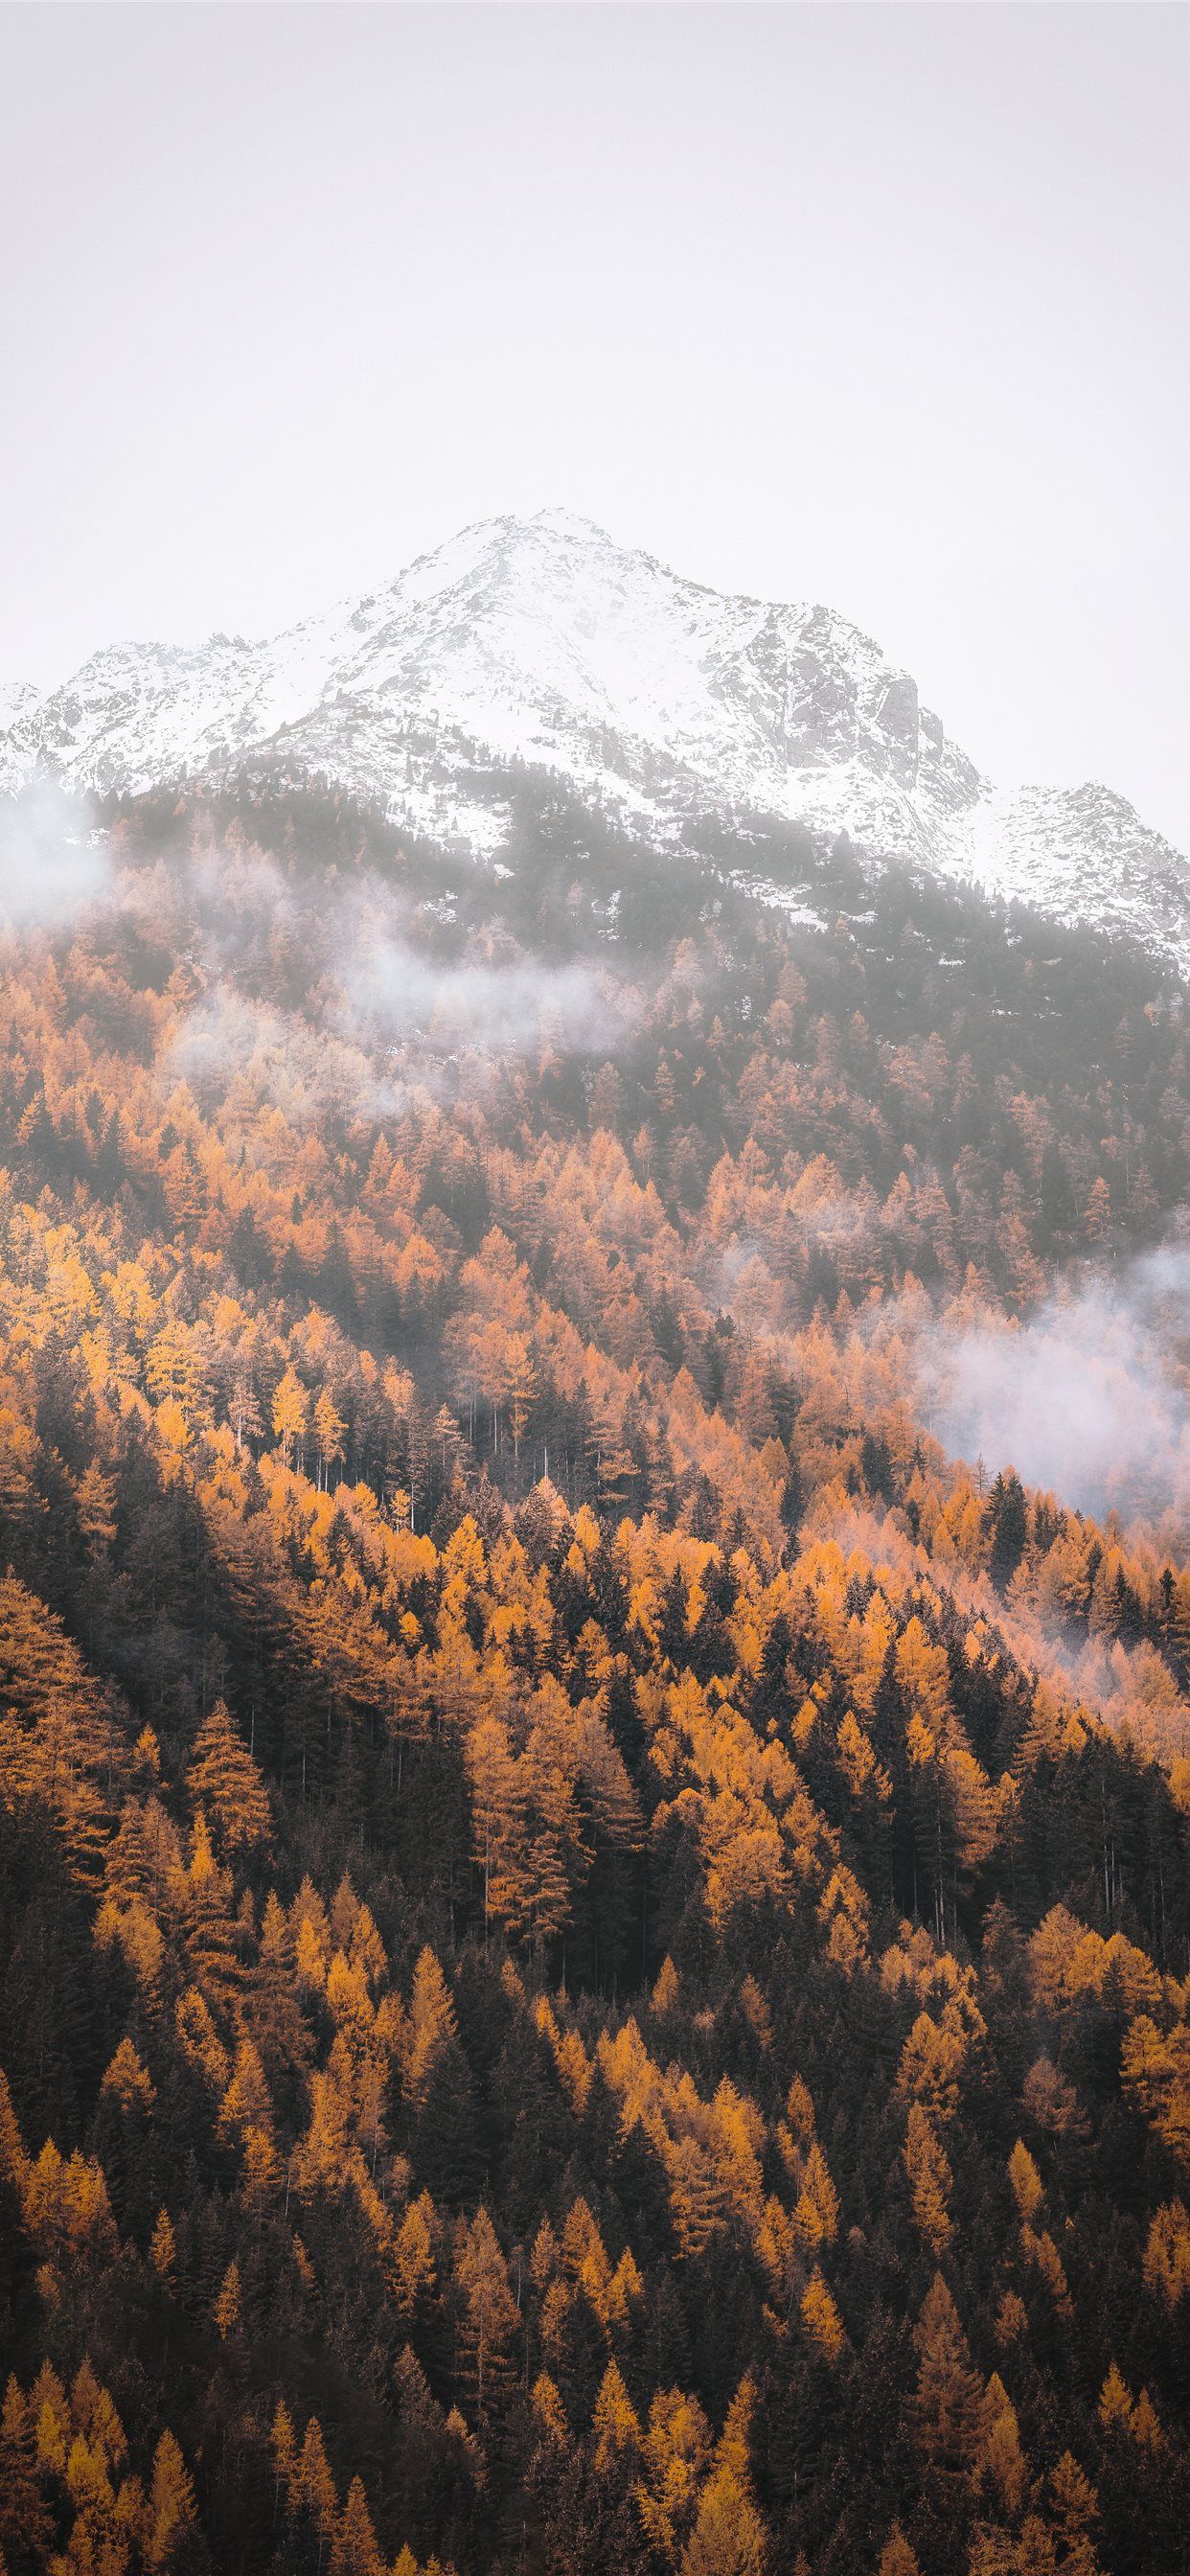 A snow capped mountain with a forest of orange and yellow trees in the foreground. - Mountain